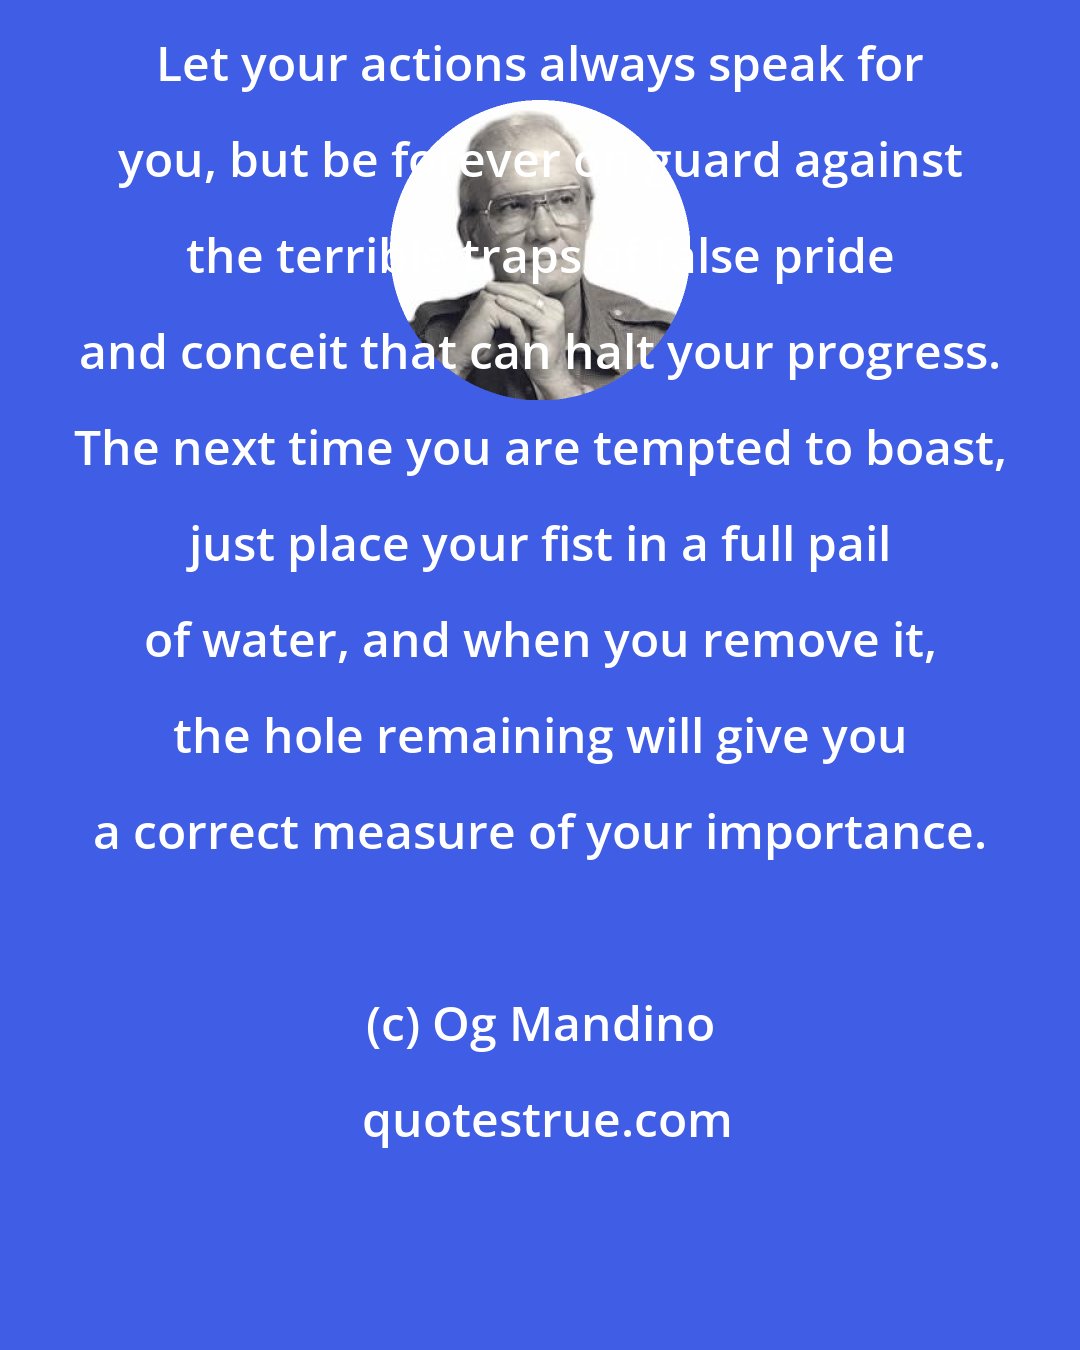 Og Mandino: Let your actions always speak for you, but be forever on guard against the terrible traps of false pride and conceit that can halt your progress. The next time you are tempted to boast, just place your fist in a full pail of water, and when you remove it, the hole remaining will give you a correct measure of your importance.